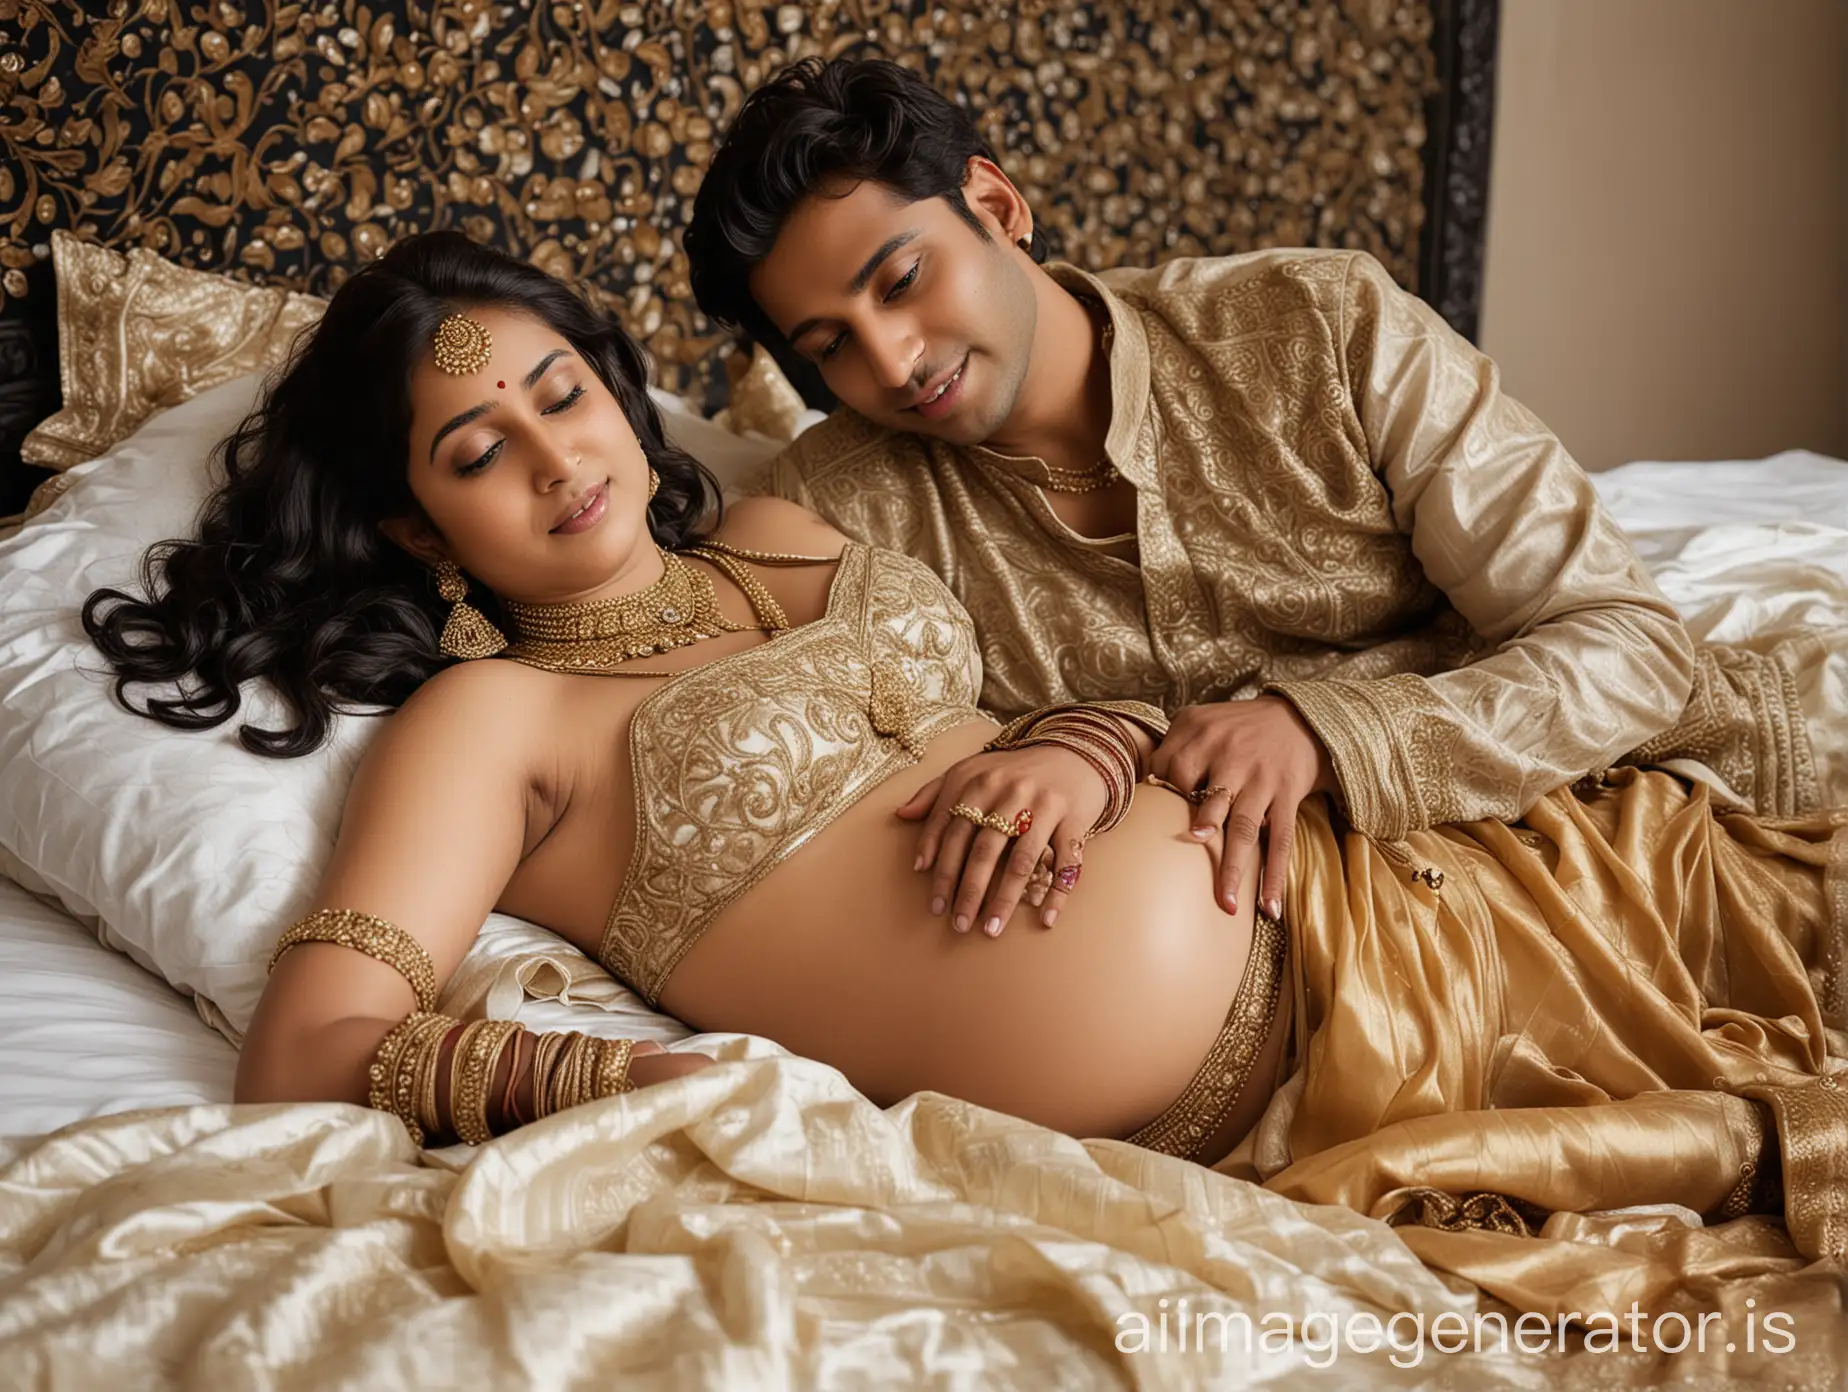 Generate a 20 year old pregnant very busty and curvy completely nude Indian woman half lying down on a black bed sideways wearing wedding jewelry beside her male boyfriend wearing saree with jewelry